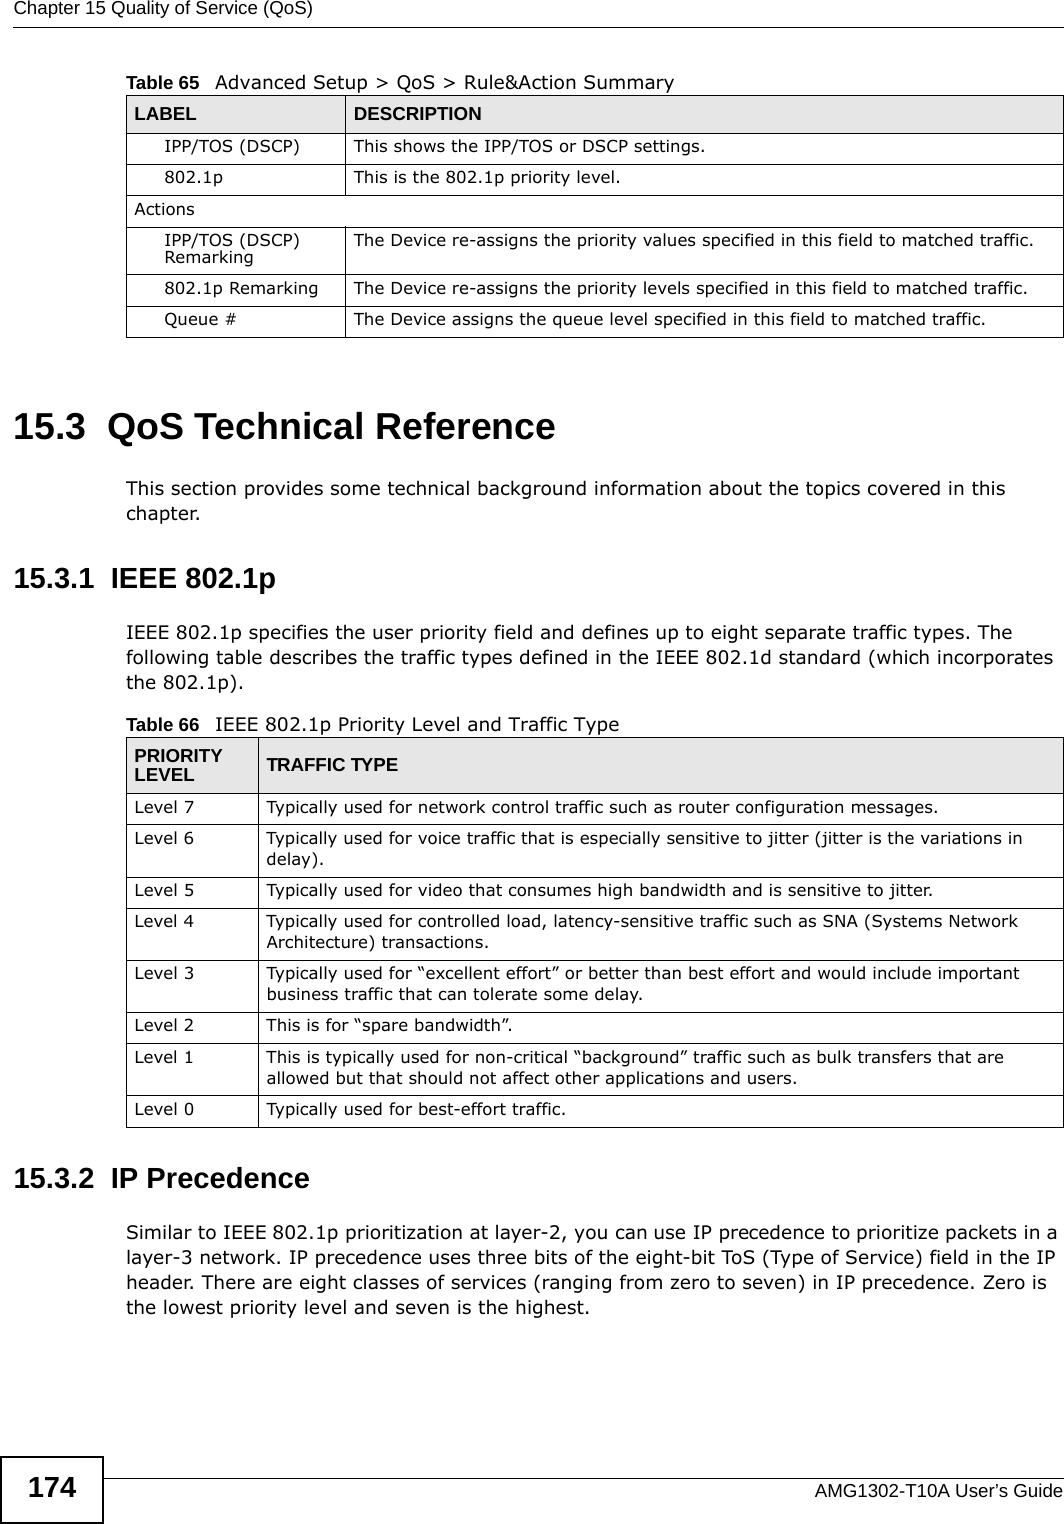 Chapter 15 Quality of Service (QoS)AMG1302-T10A User’s Guide17415.3  QoS Technical ReferenceThis section provides some technical background information about the topics covered in this chapter.15.3.1  IEEE 802.1pIEEE 802.1p specifies the user priority field and defines up to eight separate traffic types. The following table describes the traffic types defined in the IEEE 802.1d standard (which incorporates the 802.1p). 15.3.2  IP PrecedenceSimilar to IEEE 802.1p prioritization at layer-2, you can use IP precedence to prioritize packets in a layer-3 network. IP precedence uses three bits of the eight-bit ToS (Type of Service) field in the IP header. There are eight classes of services (ranging from zero to seven) in IP precedence. Zero is the lowest priority level and seven is the highest.IPP/TOS (DSCP) This shows the IPP/TOS or DSCP settings.802.1p This is the 802.1p priority level.ActionsIPP/TOS (DSCP) Remarking The Device re-assigns the priority values specified in this field to matched traffic.802.1p Remarking The Device re-assigns the priority levels specified in this field to matched traffic.Queue # The Device assigns the queue level specified in this field to matched traffic.Table 65   Advanced Setup &gt; QoS &gt; Rule&amp;Action SummaryLABEL DESCRIPTIONTable 66   IEEE 802.1p Priority Level and Traffic TypePRIORITY LEVEL TRAFFIC TYPELevel 7 Typically used for network control traffic such as router configuration messages.Level 6 Typically used for voice traffic that is especially sensitive to jitter (jitter is the variations in delay).Level 5 Typically used for video that consumes high bandwidth and is sensitive to jitter.Level 4 Typically used for controlled load, latency-sensitive traffic such as SNA (Systems Network Architecture) transactions.Level 3 Typically used for “excellent effort” or better than best effort and would include important business traffic that can tolerate some delay.Level 2 This is for “spare bandwidth”. Level 1 This is typically used for non-critical “background” traffic such as bulk transfers that are allowed but that should not affect other applications and users. Level 0 Typically used for best-effort traffic.